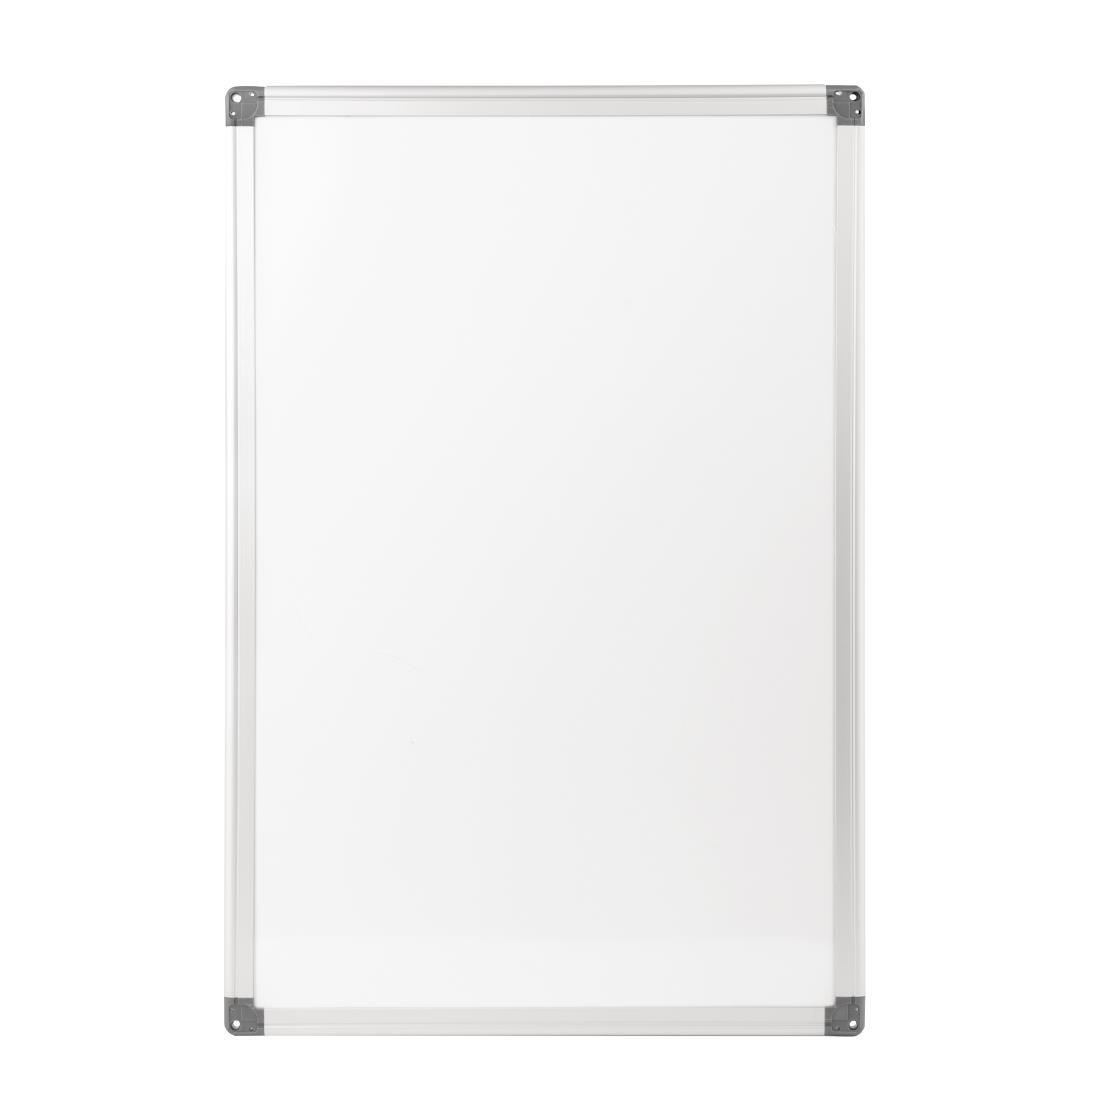 Olympia White Magnetic Board - GG045  - 1